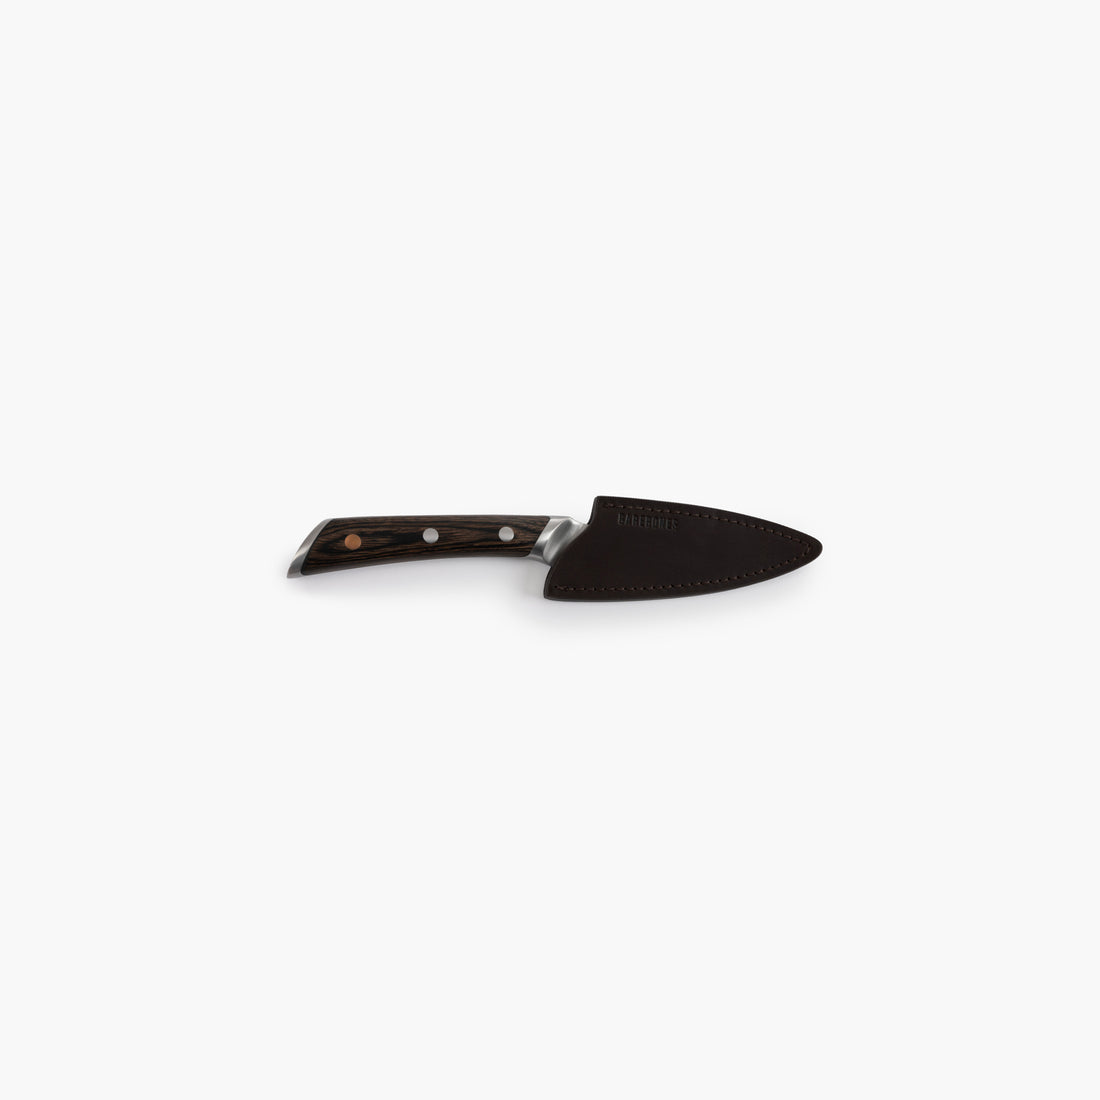 Paring Knife 4 in